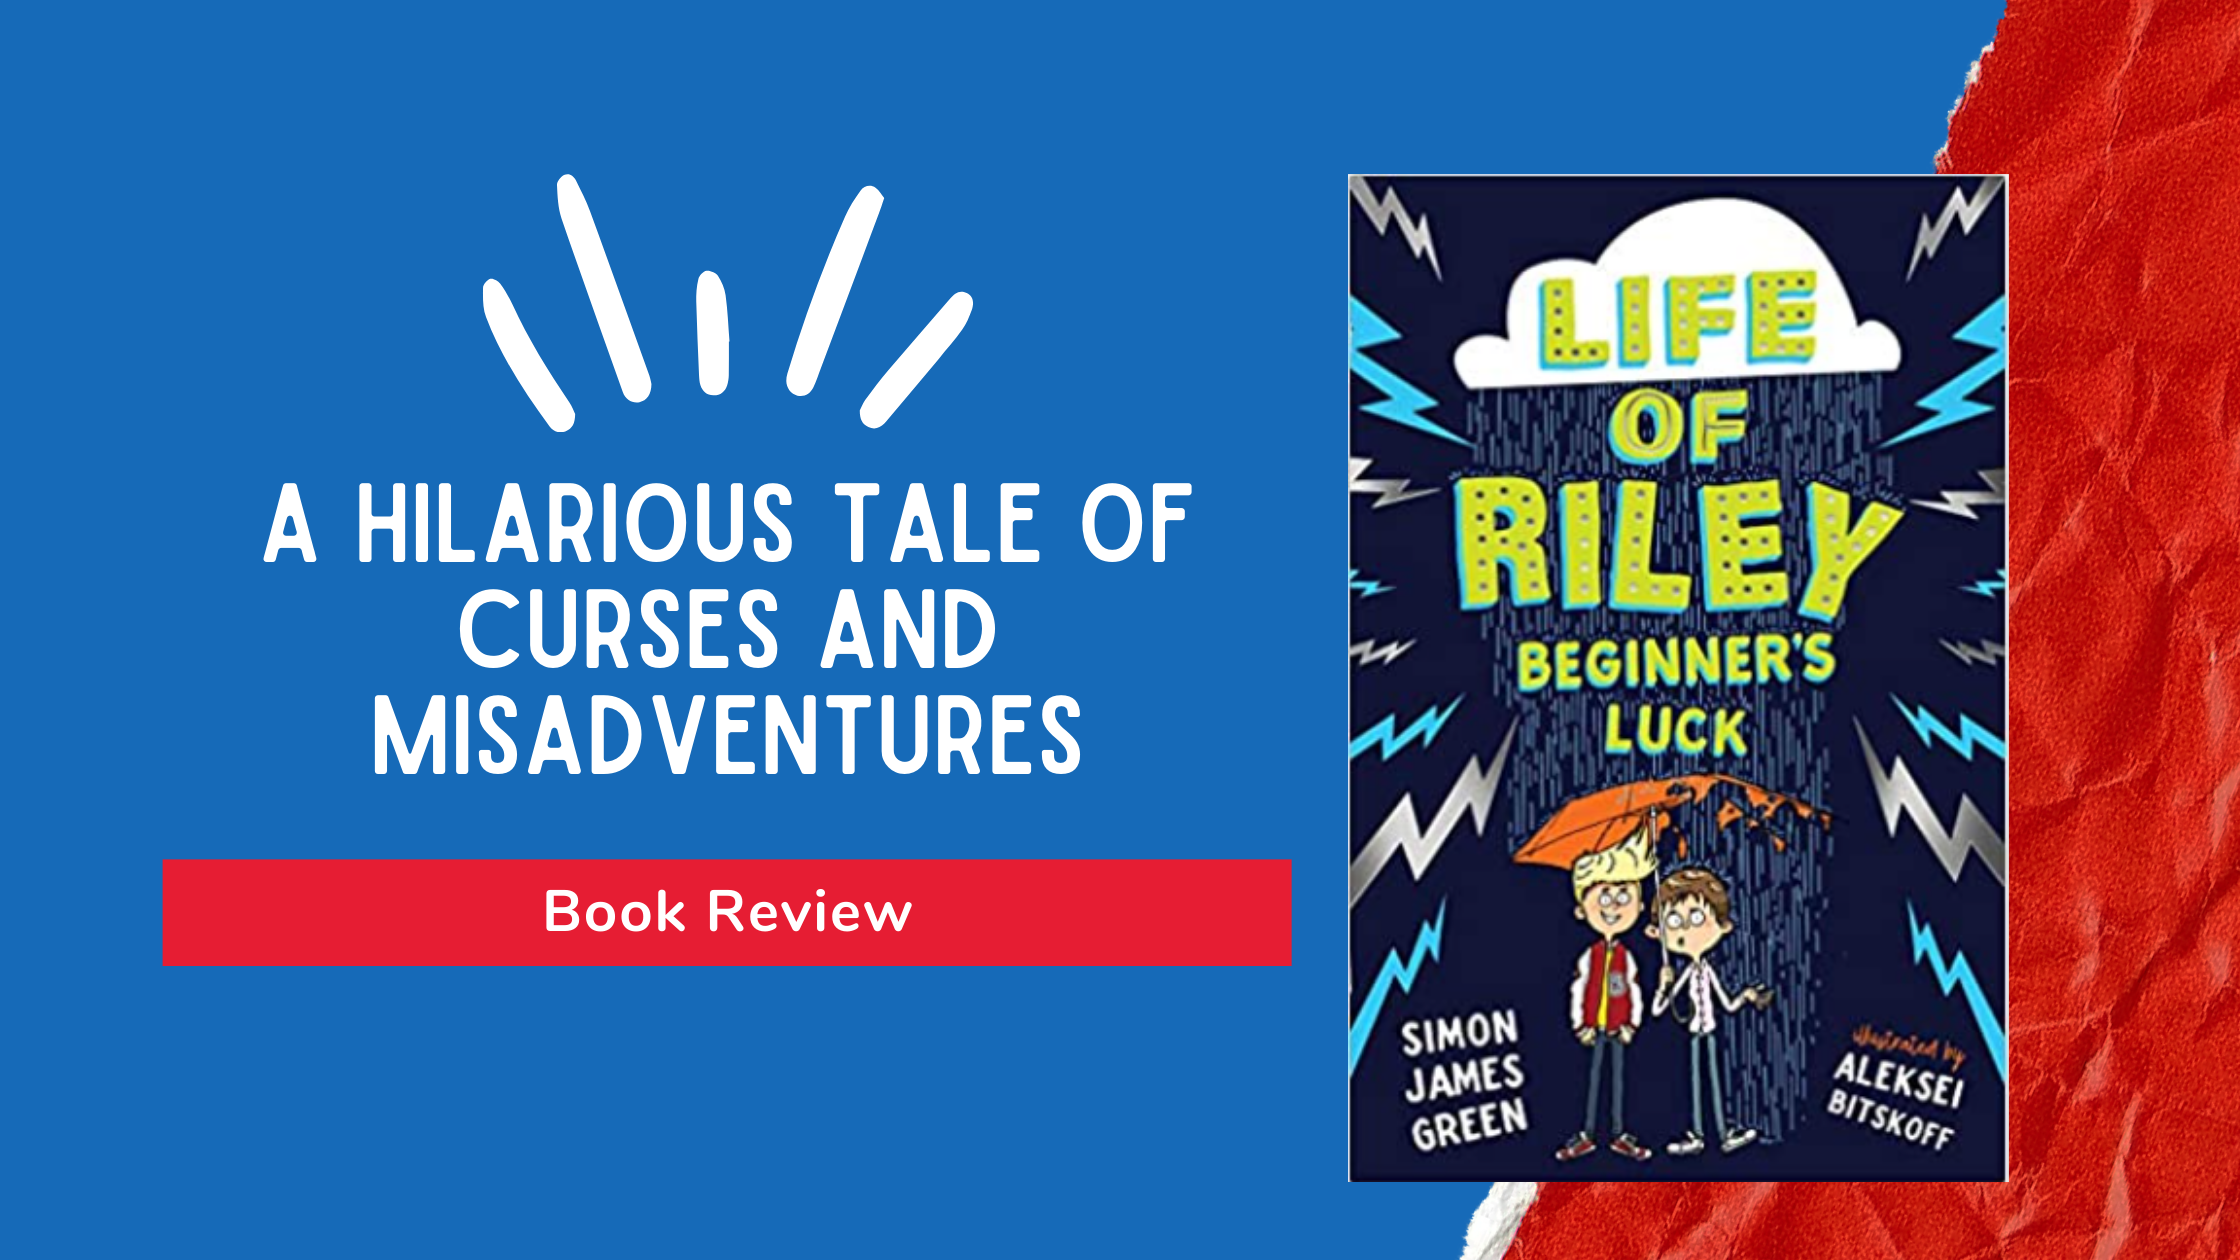 Life of Riley - Book Review